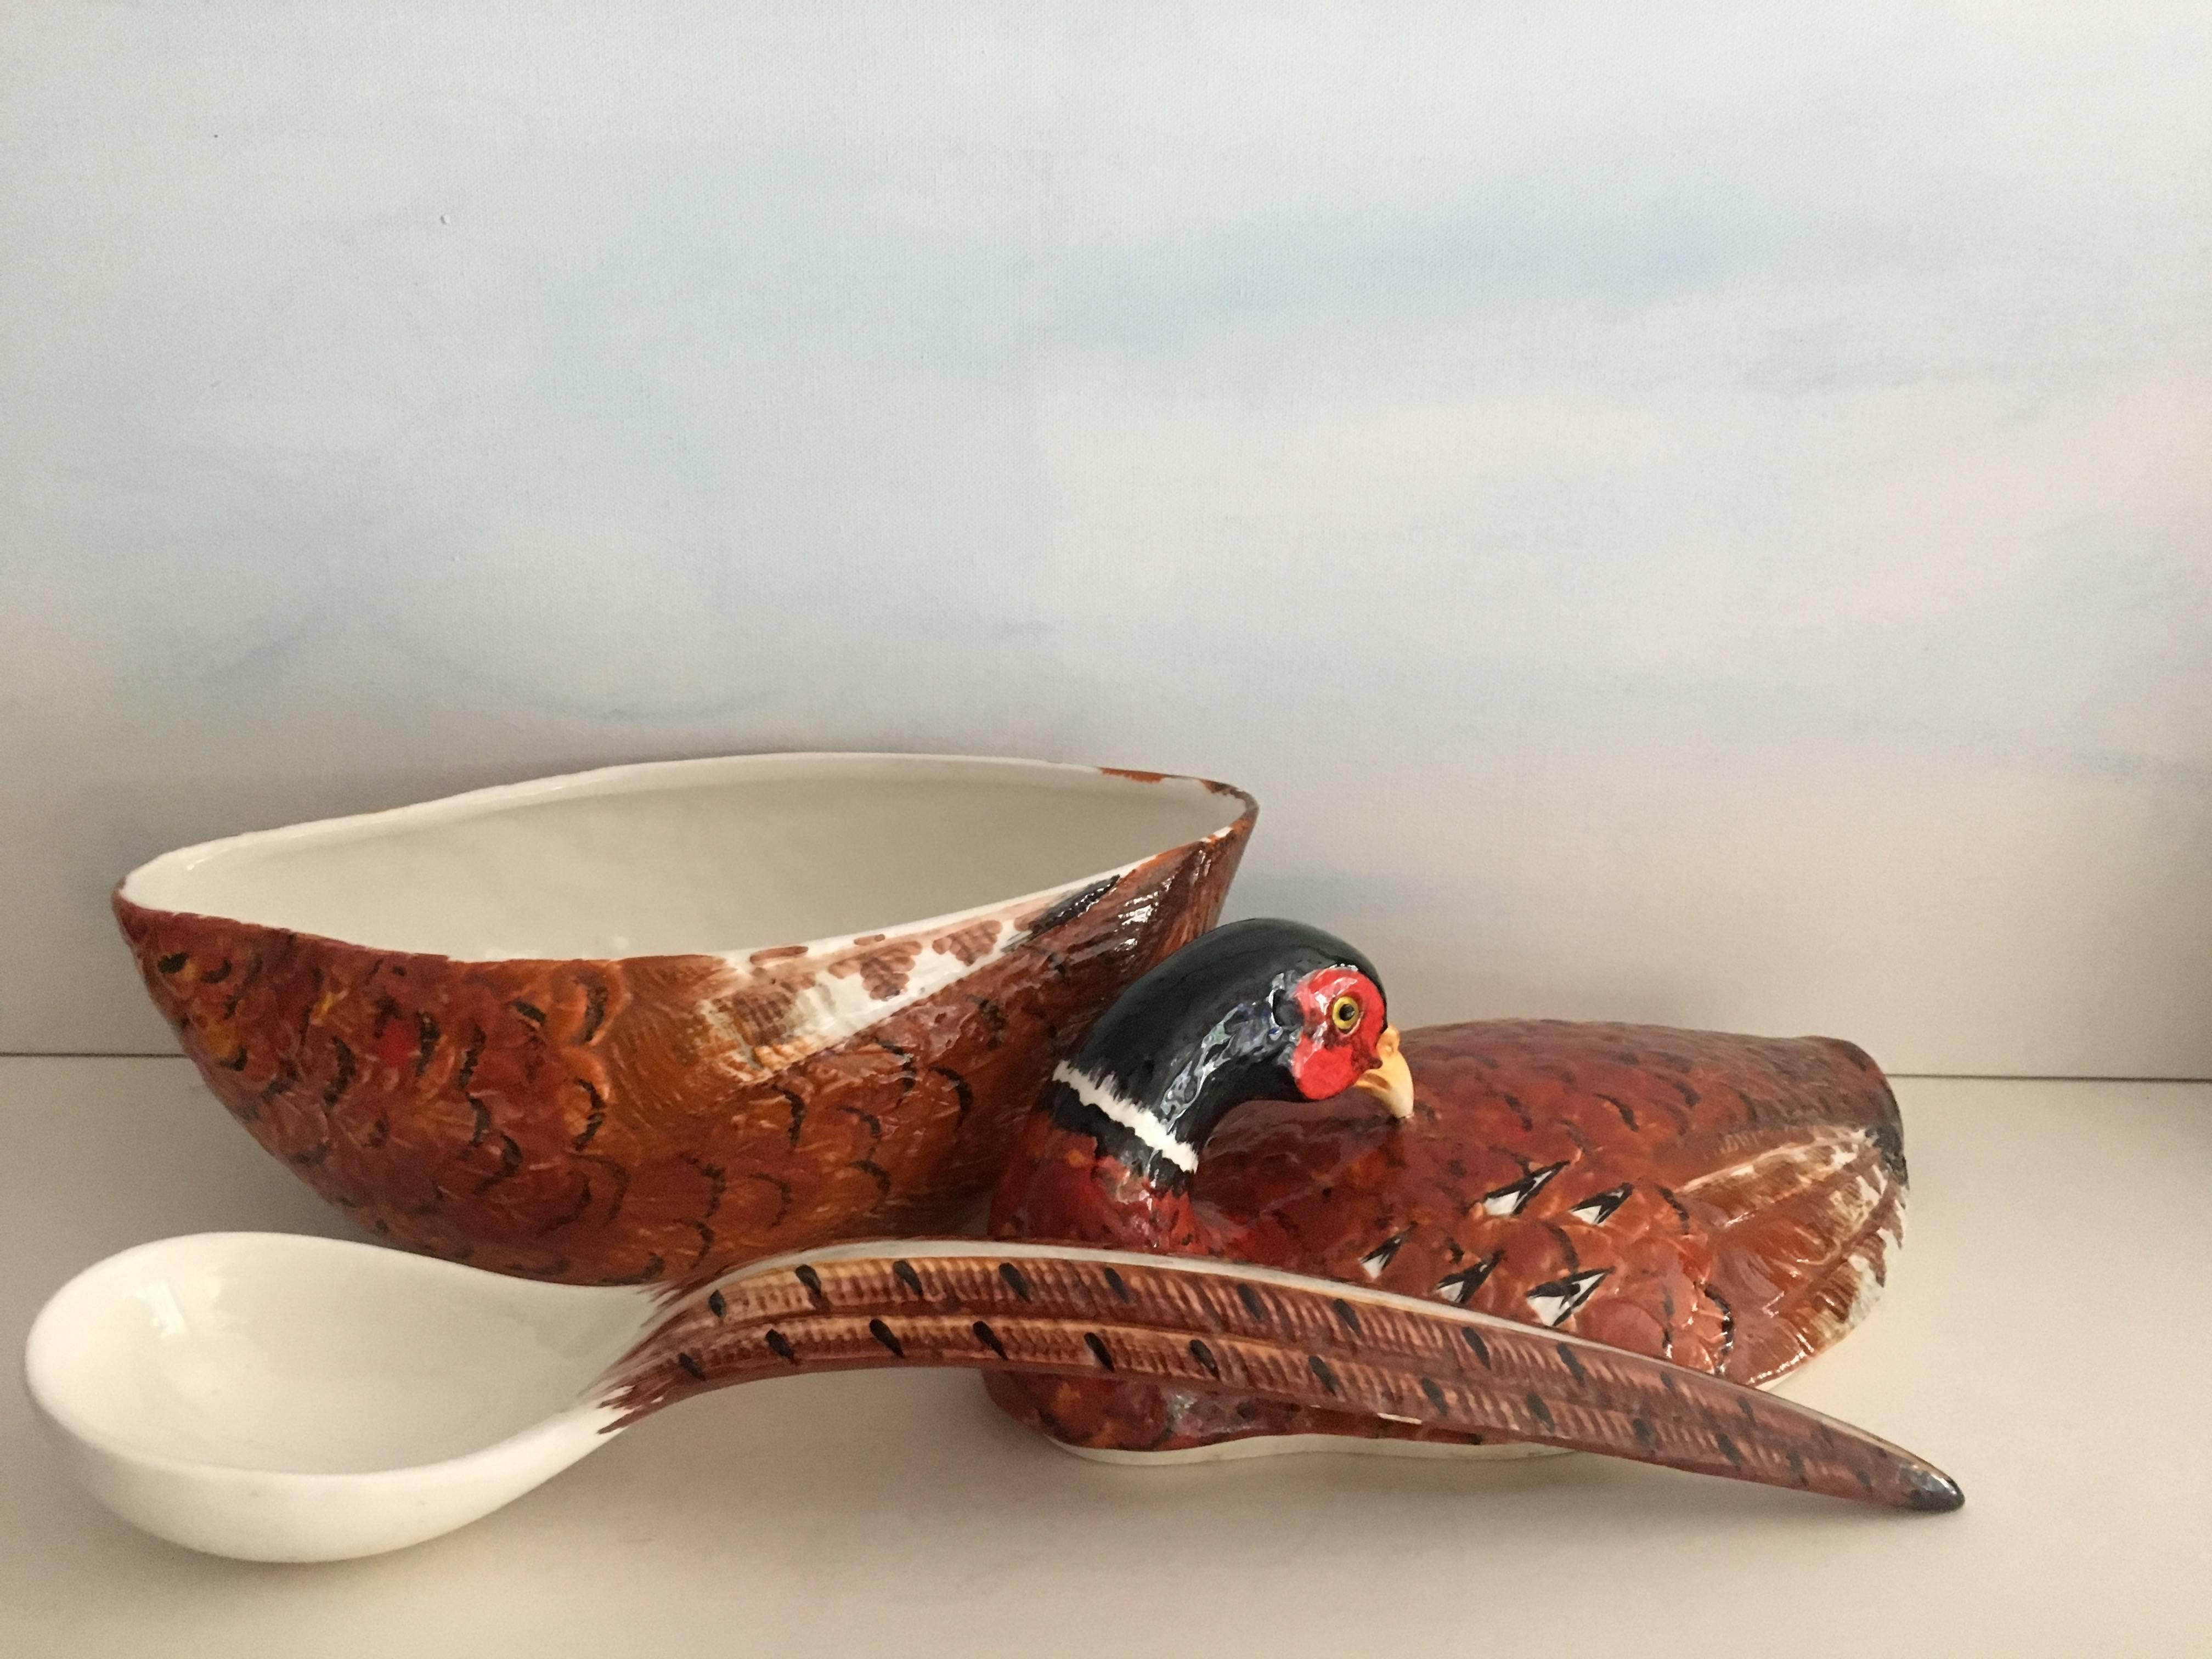 Hand-painted Italian pheasant tureen - smart design utilizes the tail as the ladle or spoon. Originally made for Neiman Marcus a very handsome addition to a holiday table.

Serving soups and stews for the holiday's or christmas!